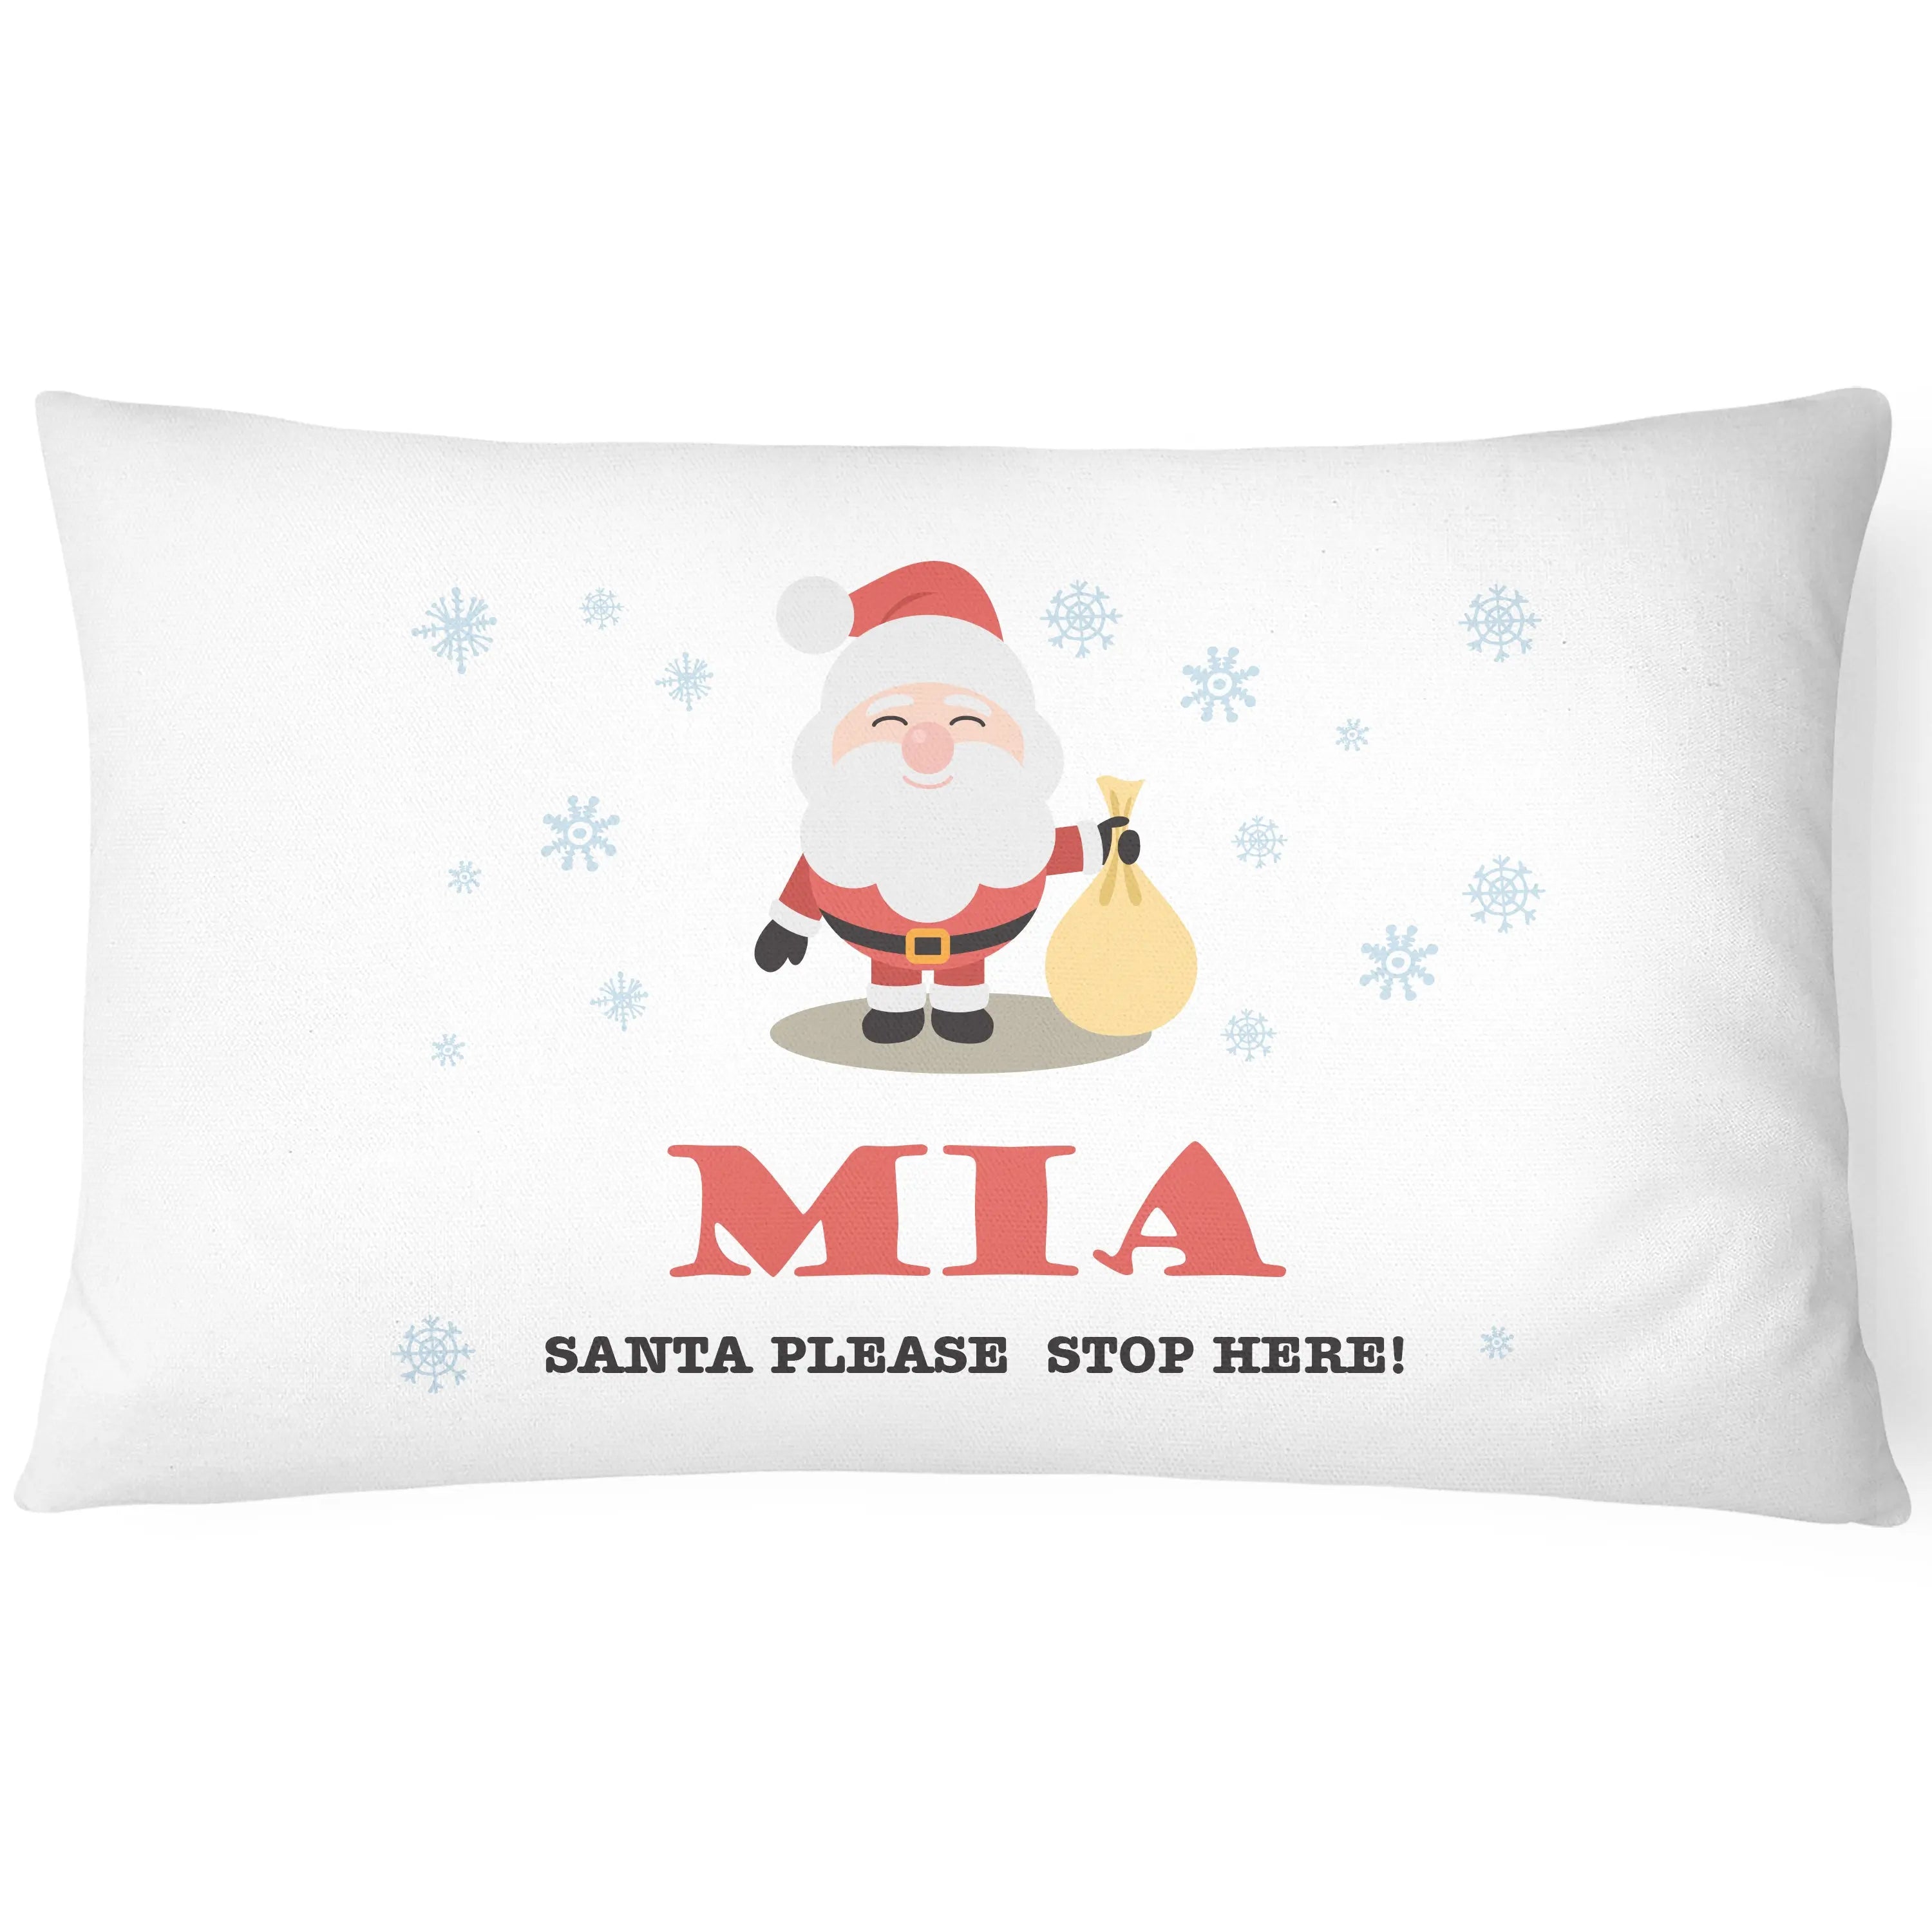 Christmas Pillowcase for Kids - Personalise With Any Name - Perfect Children's Gift - CushionPop